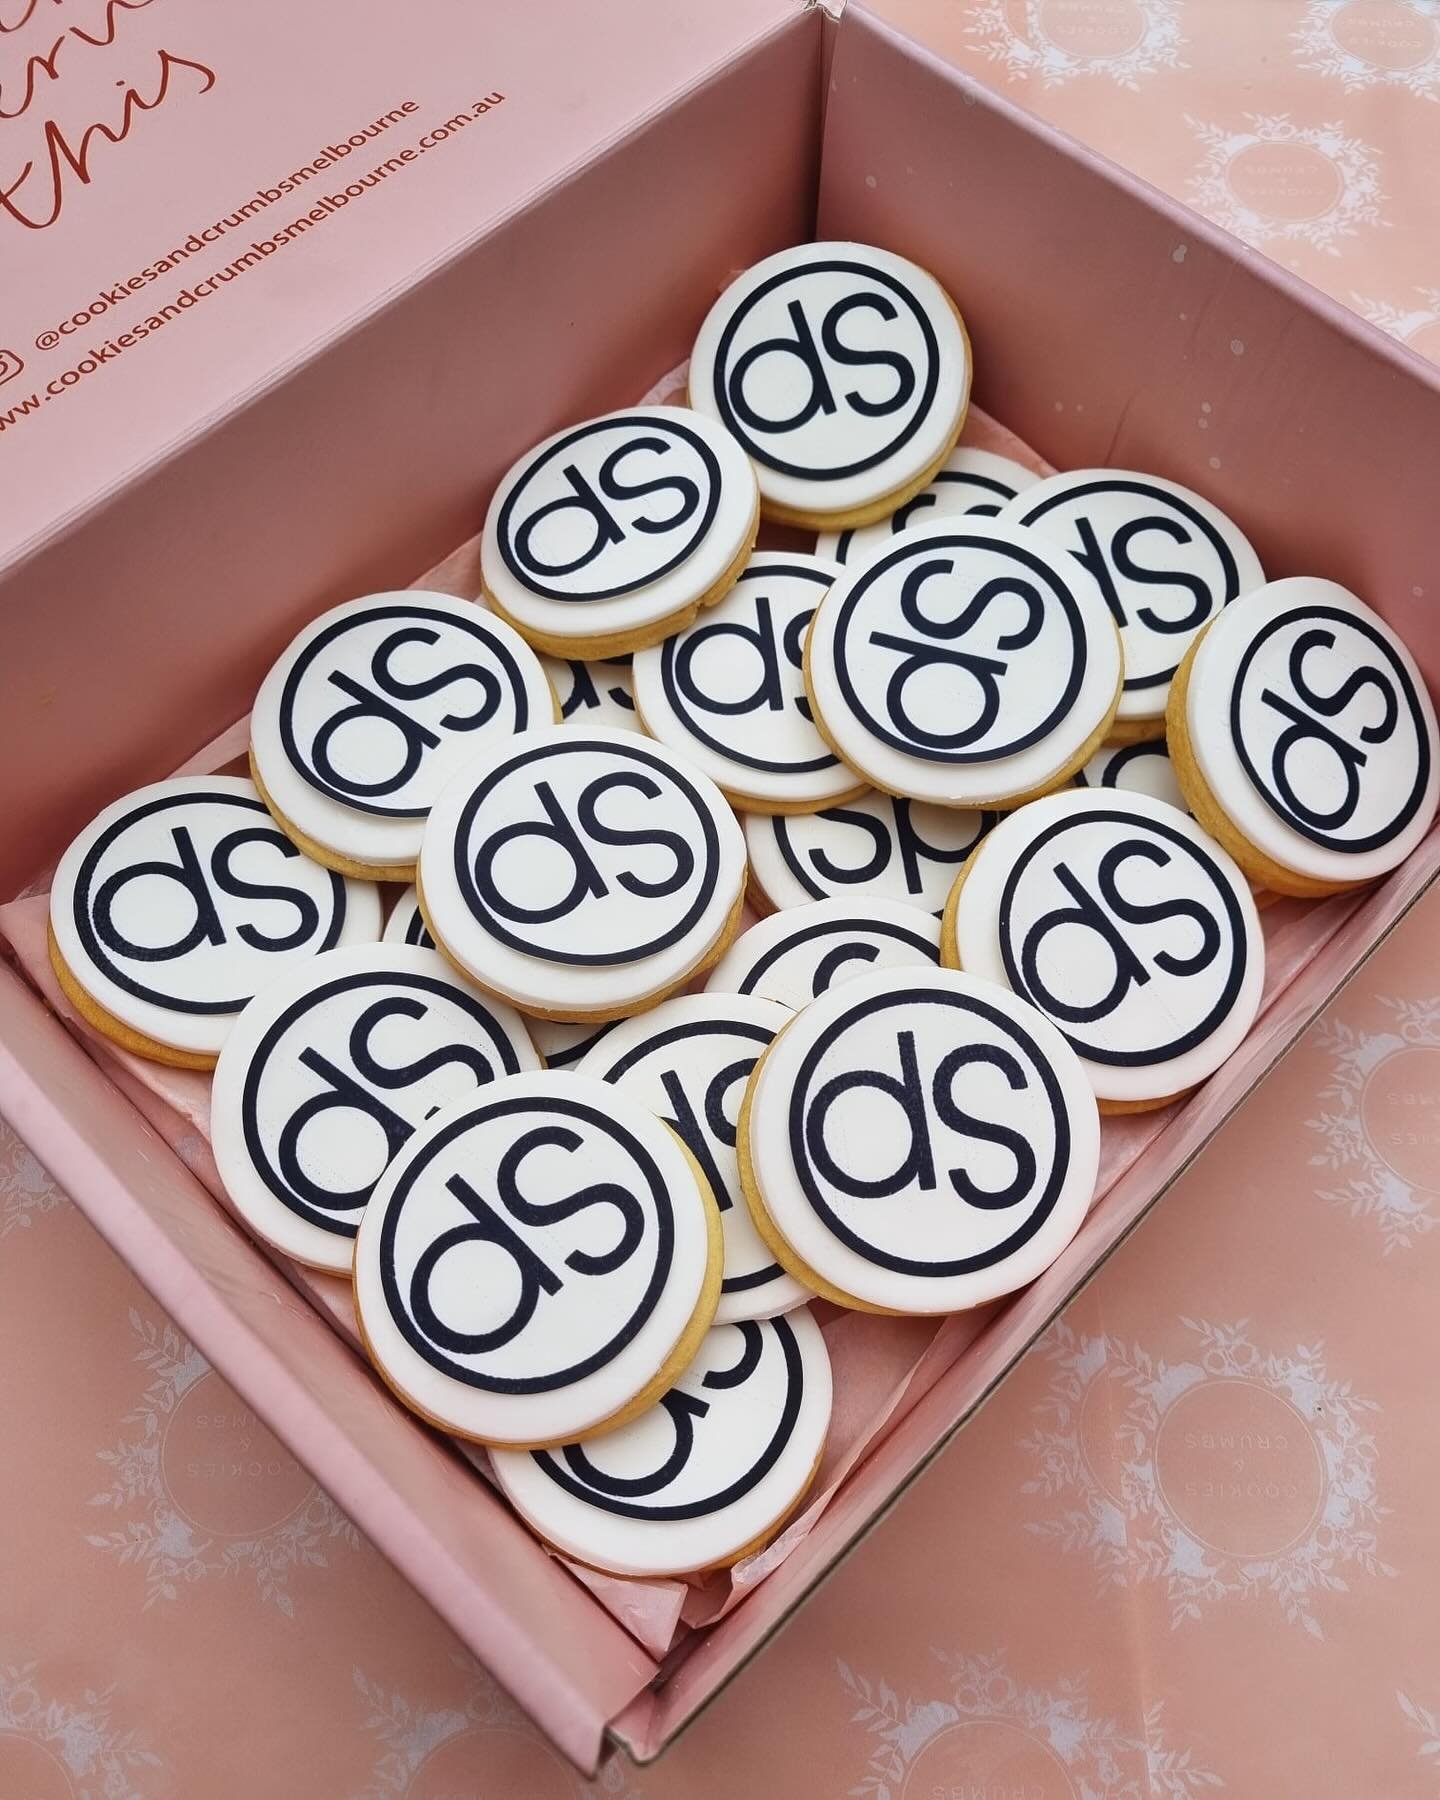 Logo cookies for your special events &bull; Logo cookies for product launches &bull; Logo cookies to kick off a new business &bull; so many reasons to celebrate with our branded logo cookies! 🎉🎉🎉

@studiopilatesarmadale celebrating with our cookie